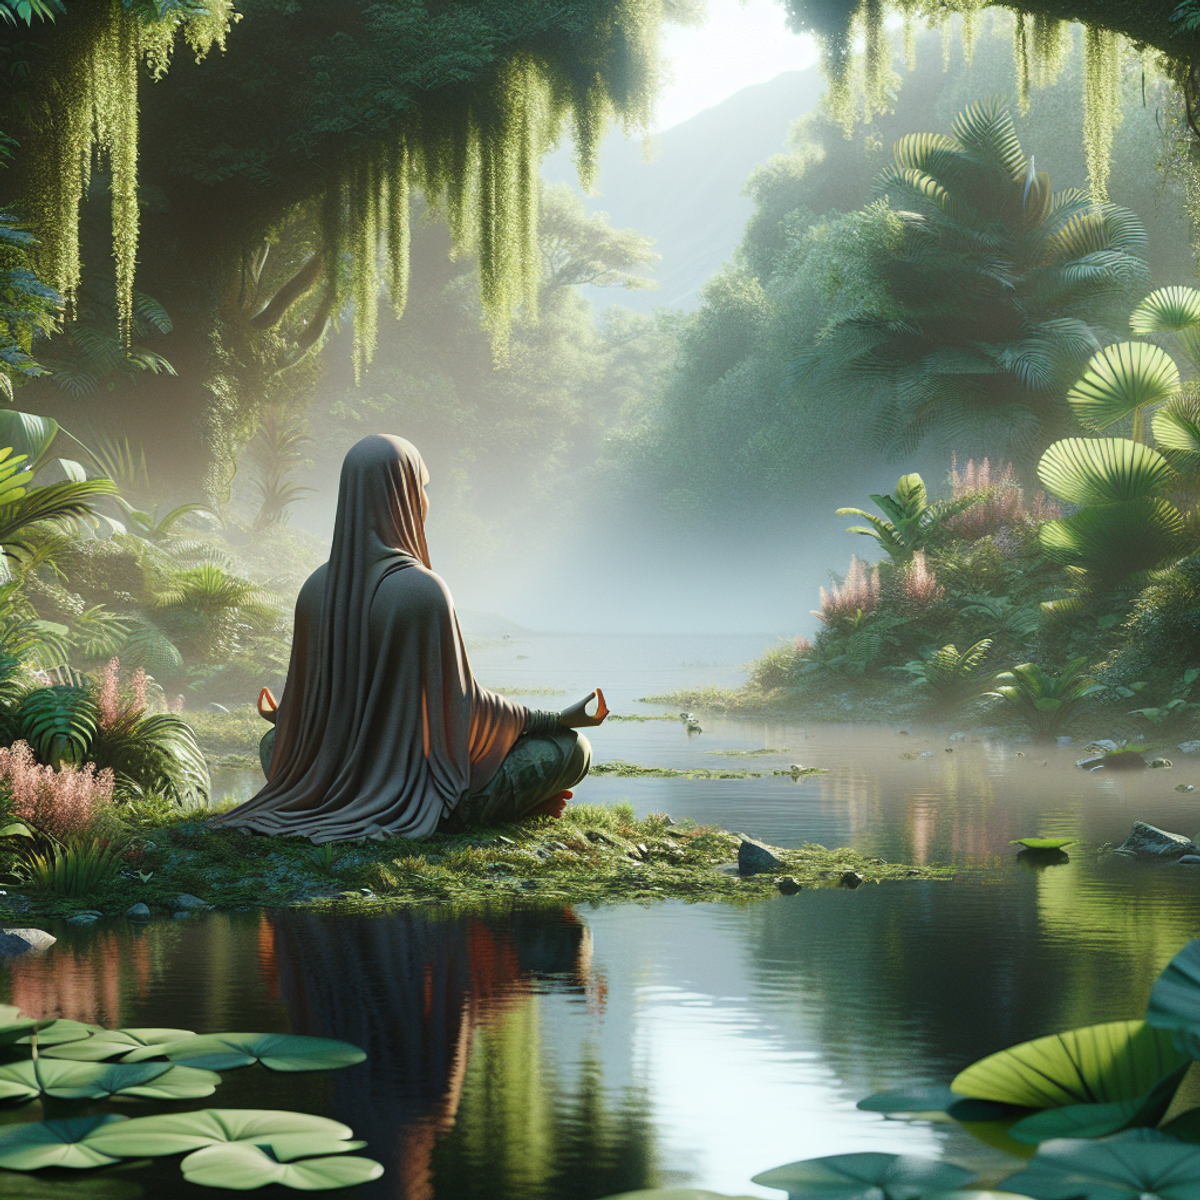 A woman of Middle-Eastern descent meditates in a serene natural environment, surrounded by lush greenery and calm waters.